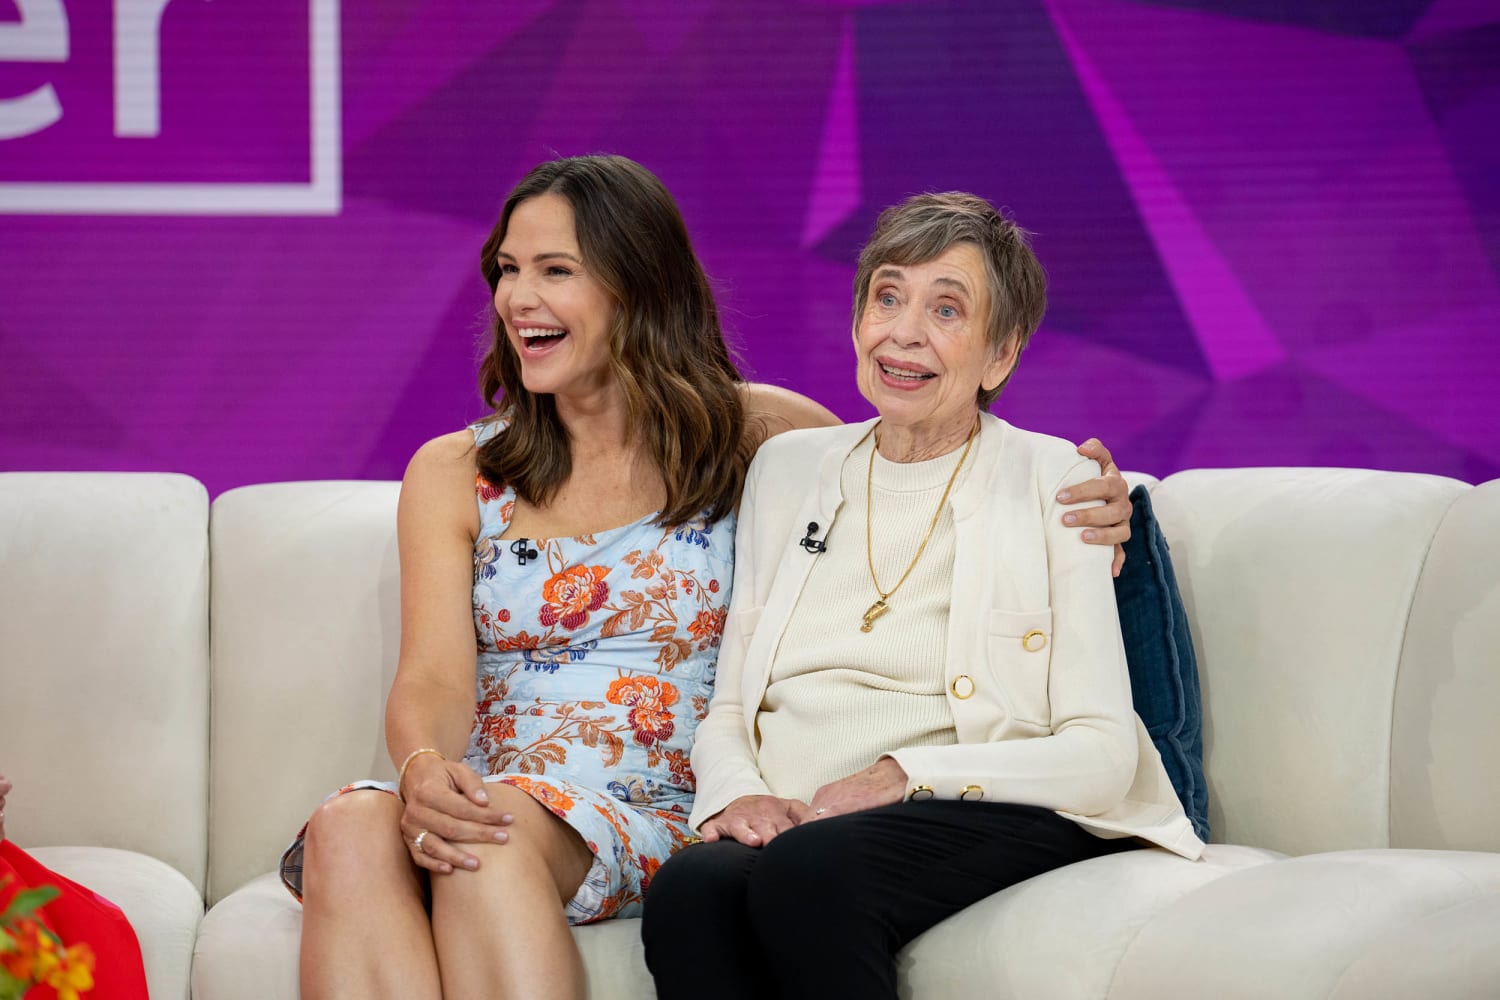 Jennifer Garner and Her Mom Bring West Virginia Flavor to the Today Show